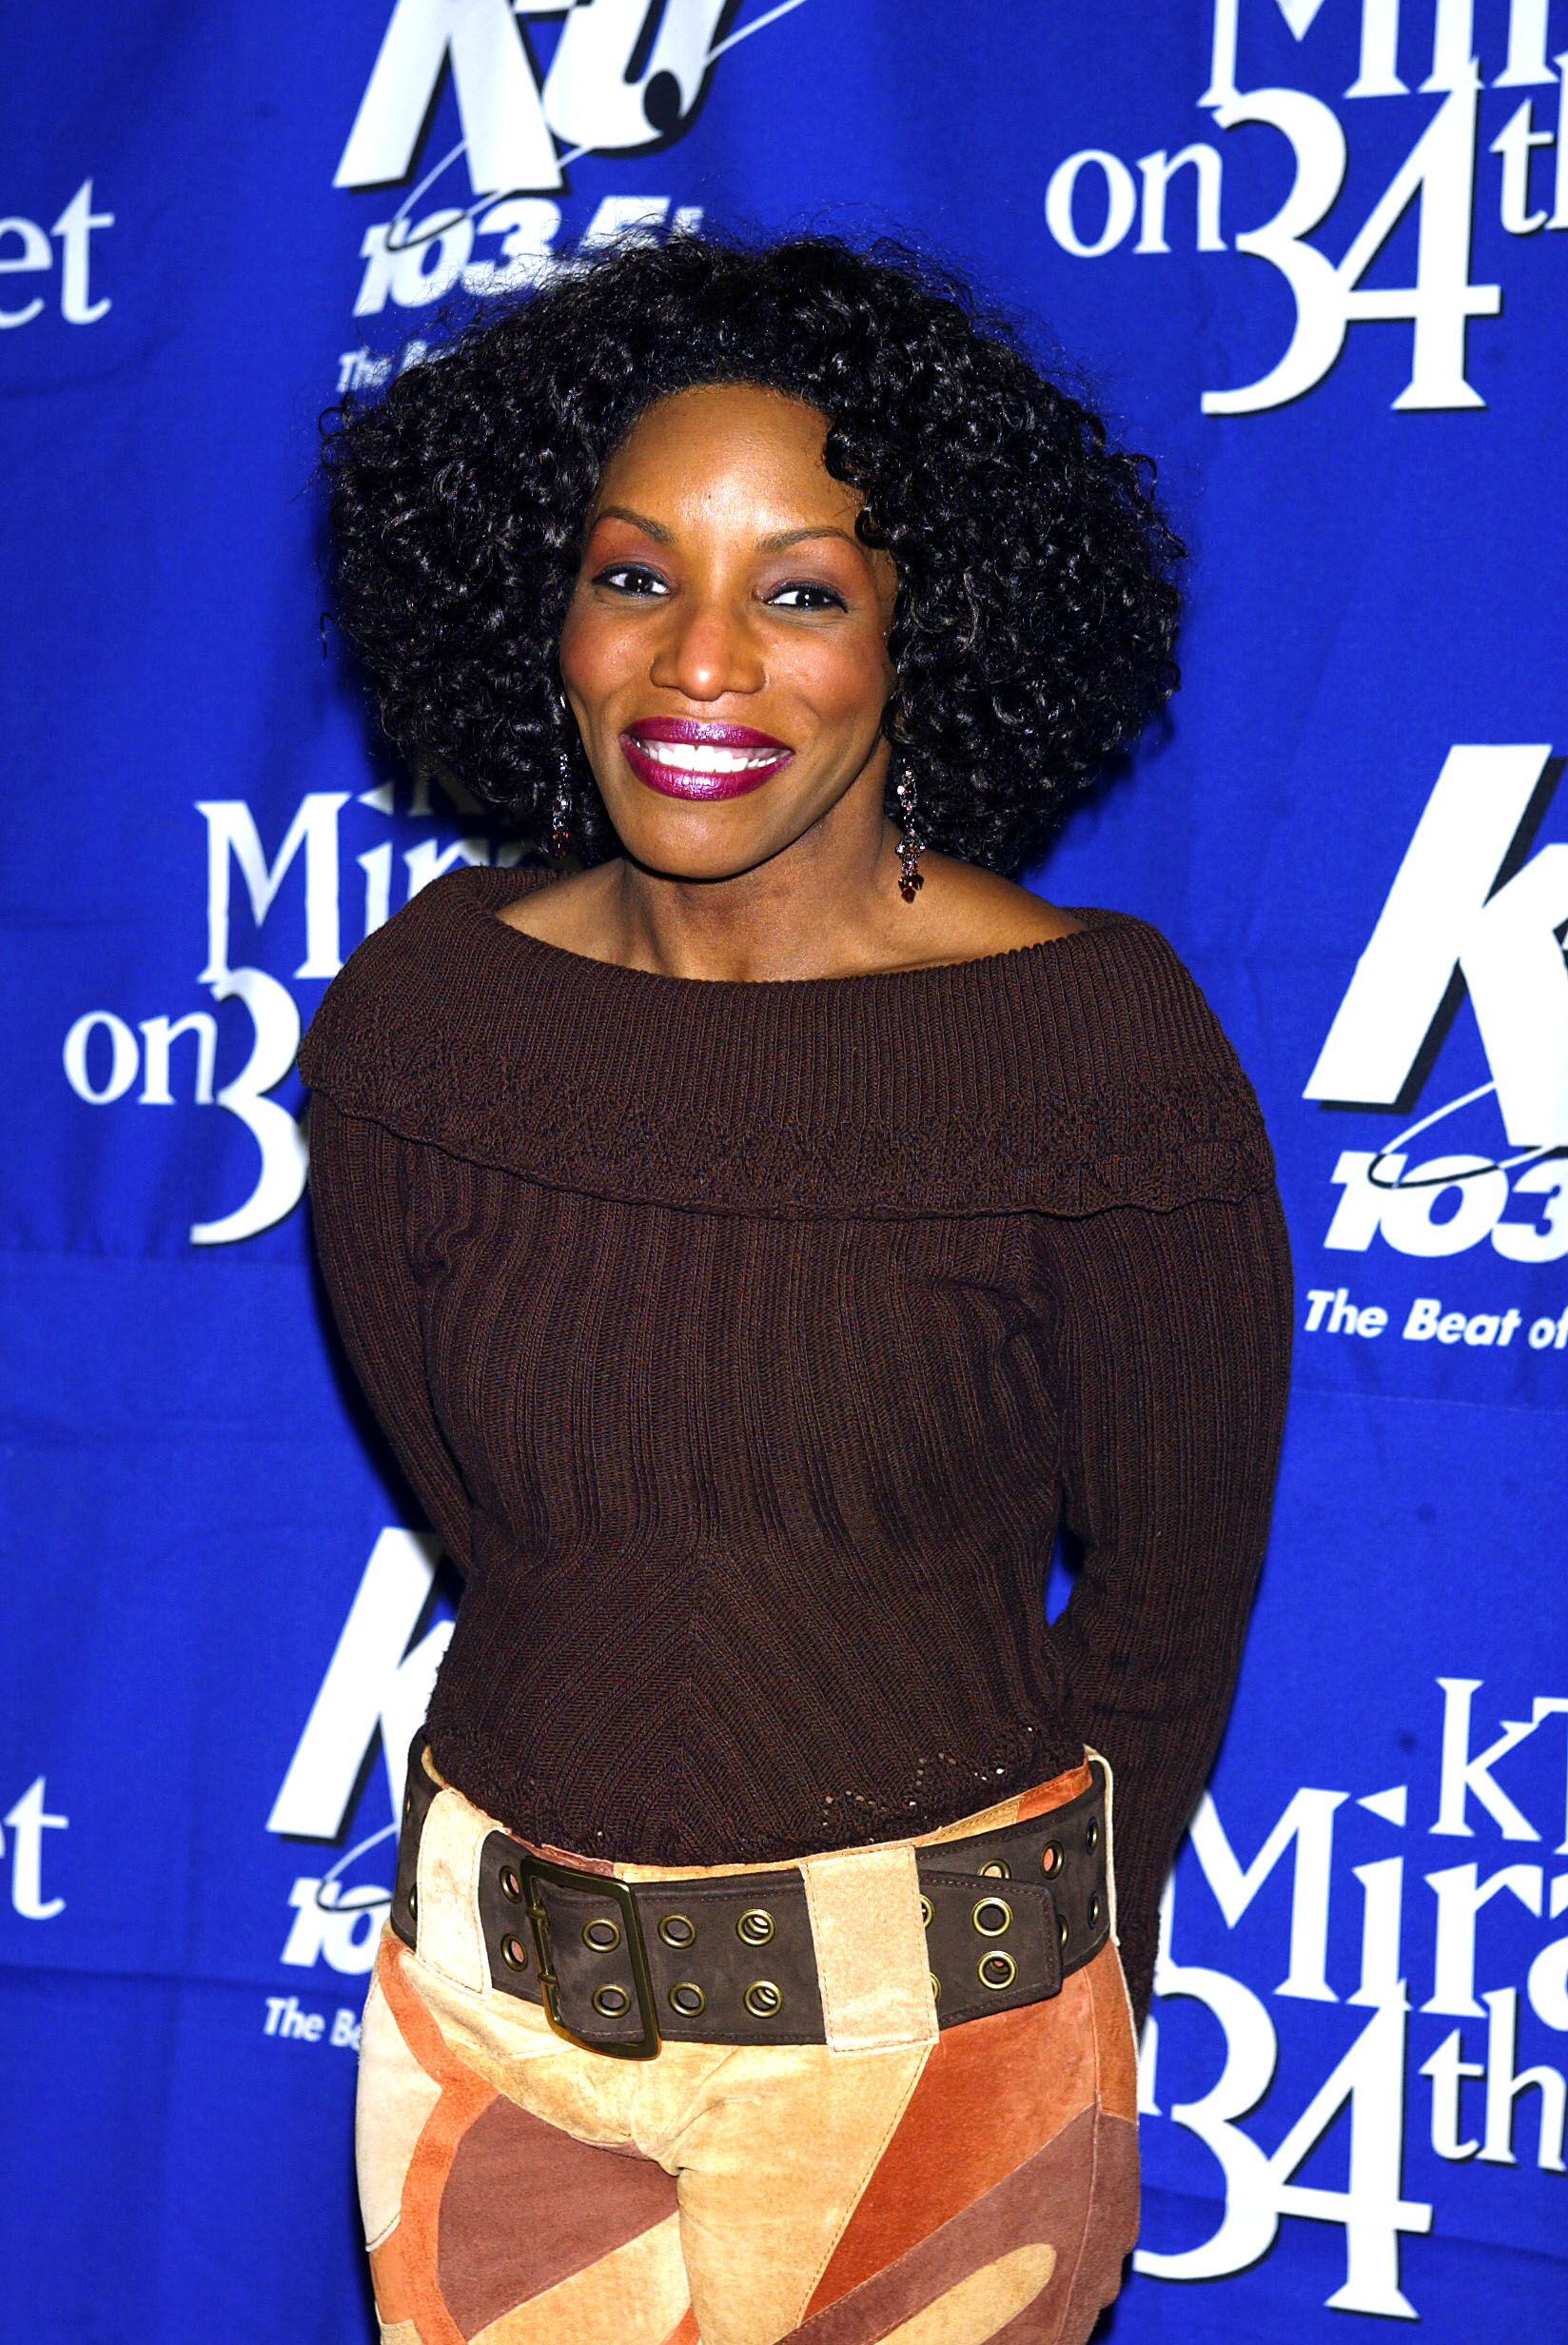 Stephanie Mills backstage during "KTU's Miracle on 34th Street" hoilday concert on December 18, 2002 in New York City | Photo: Getty Images